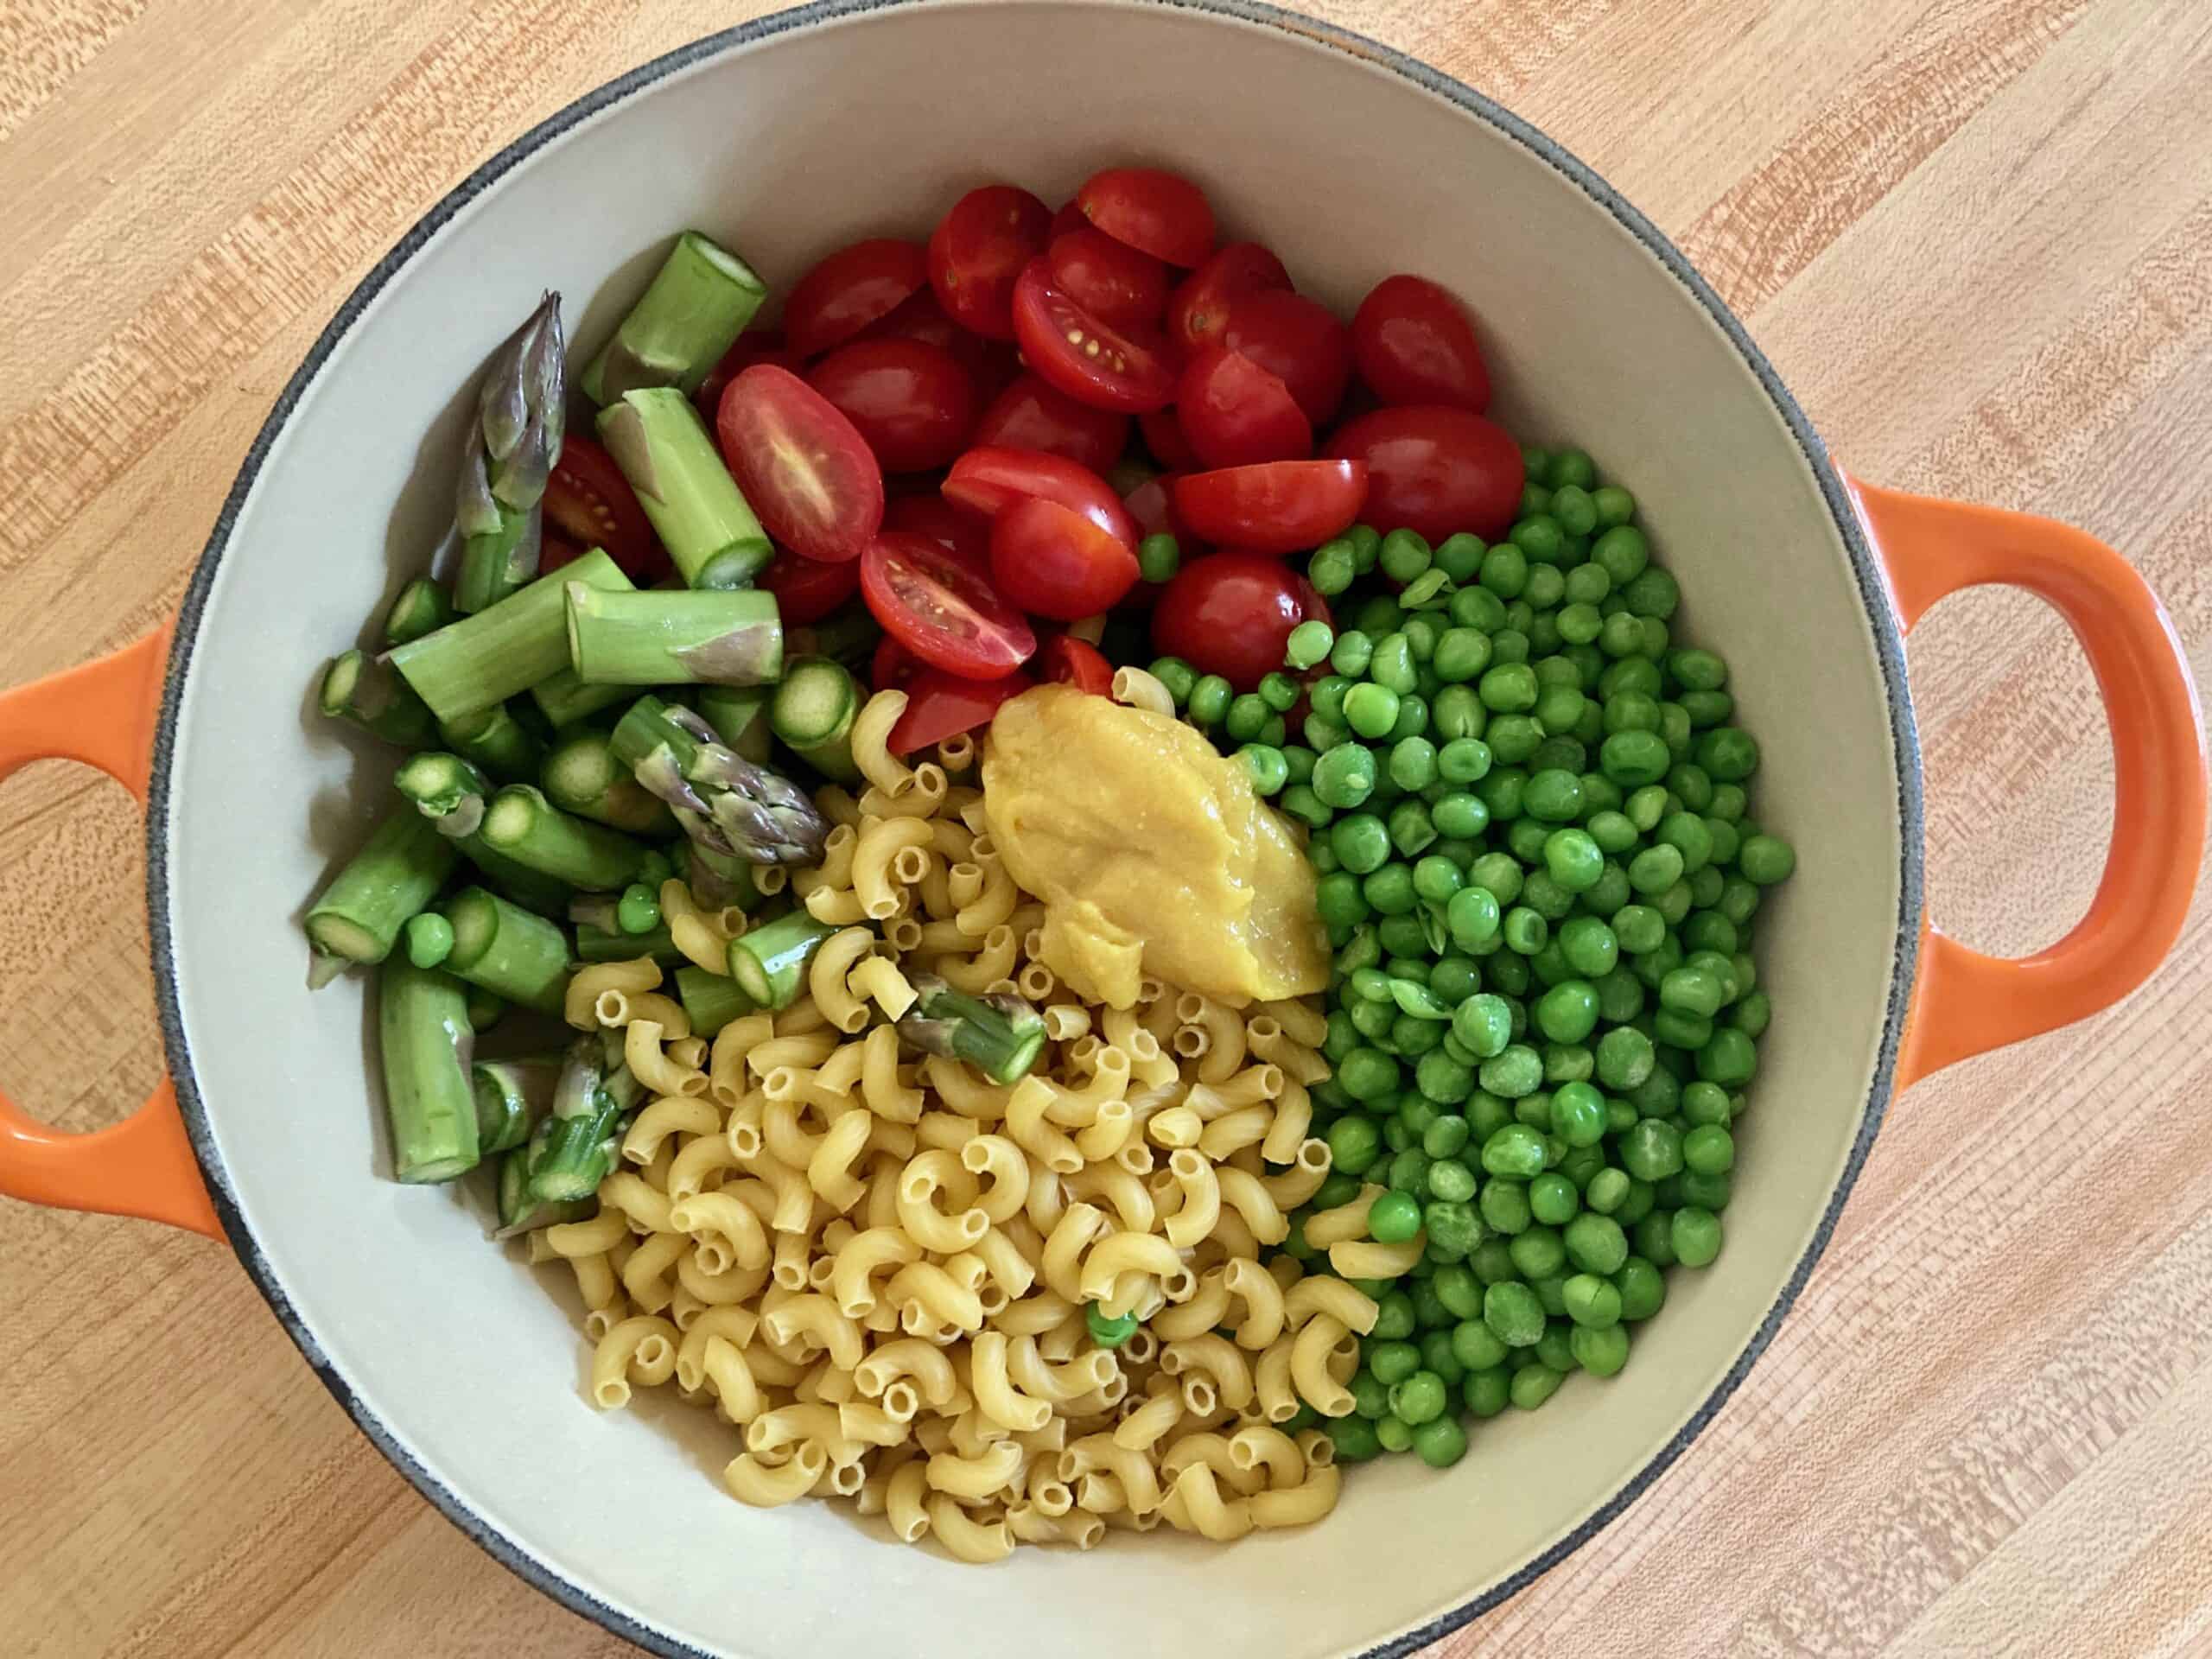 Chopped asparagus, sliced tomatoes, elbow macaroni, peas, and better than bouillon paste in an enameled cast iron soup pot shot from above.